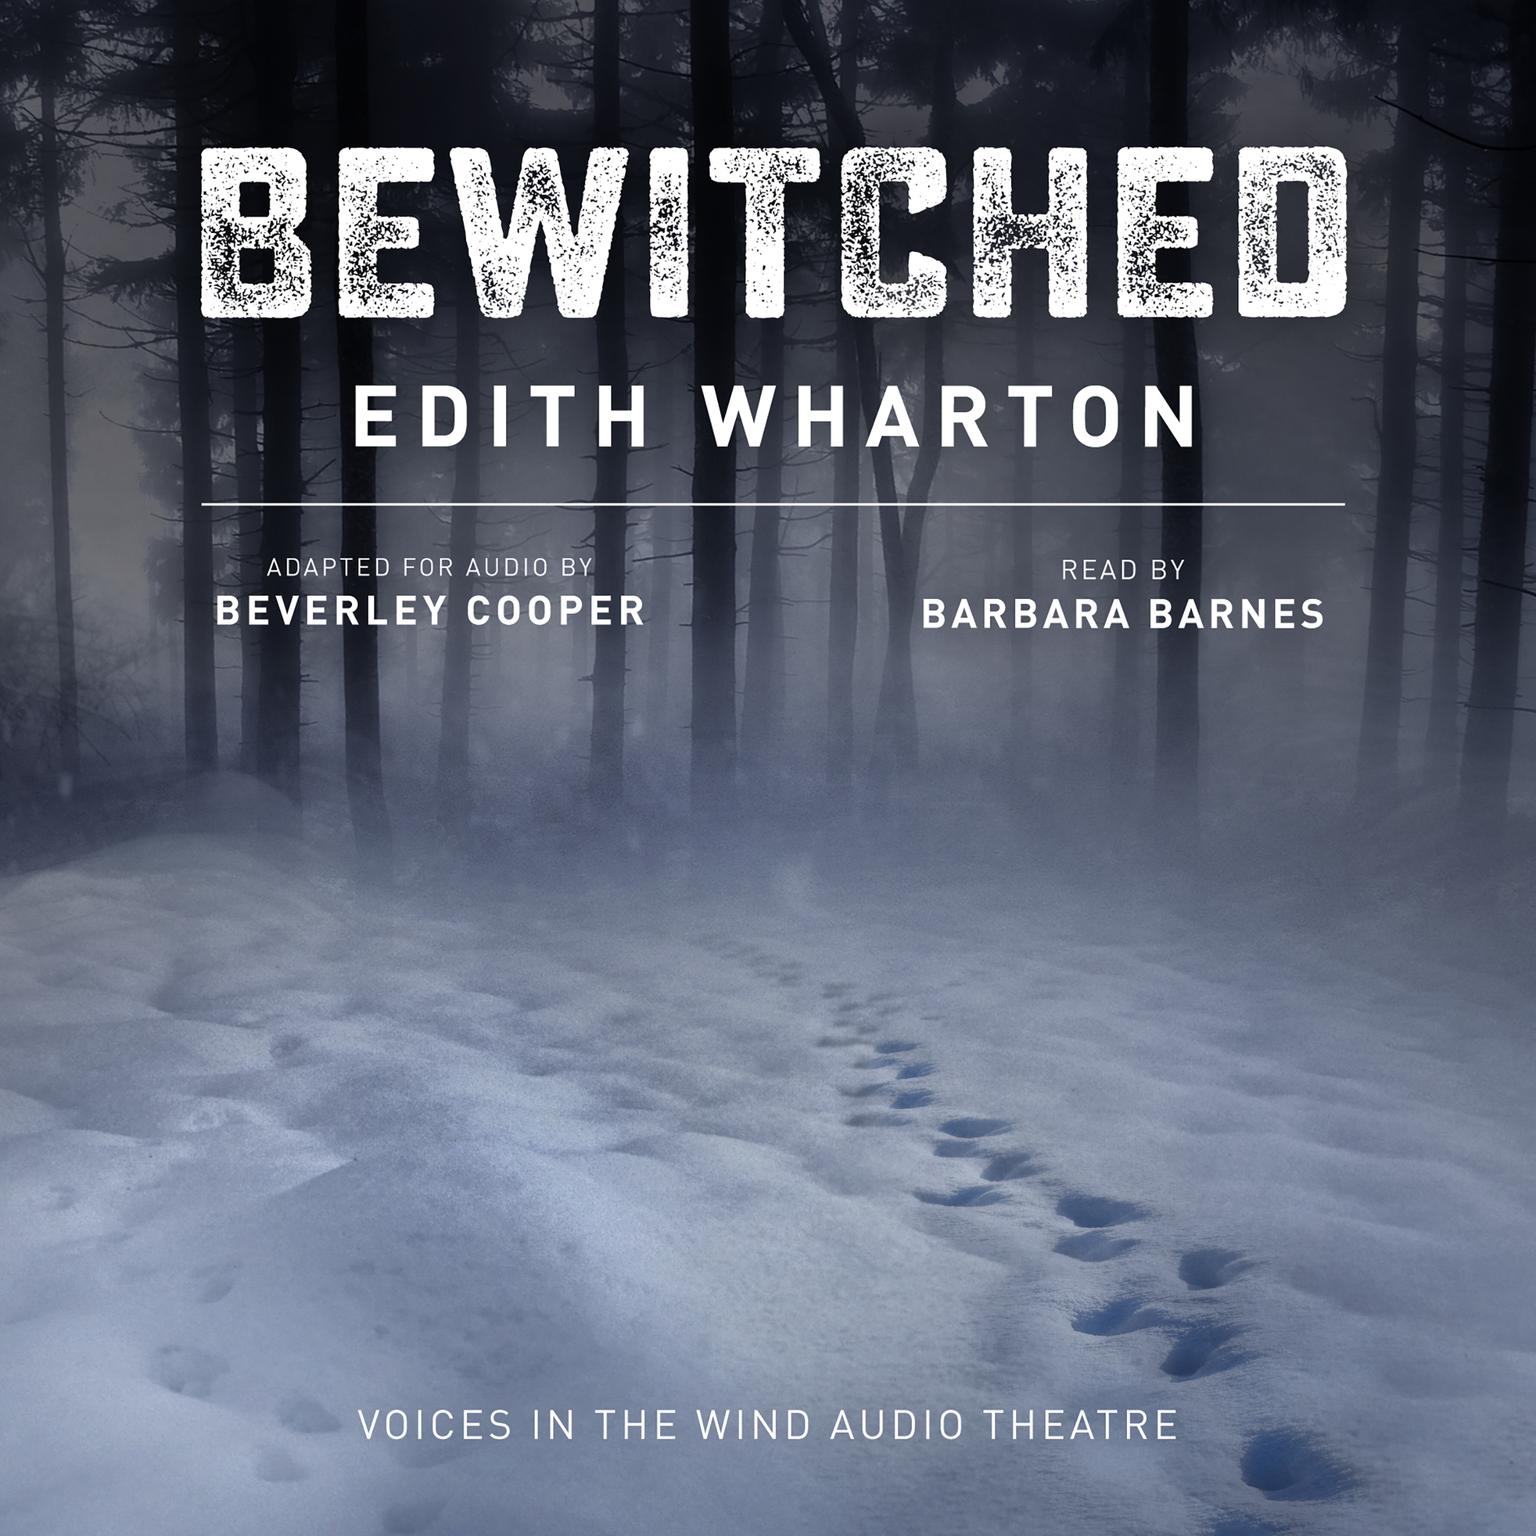 Bewitched (Abridged) Audiobook, by Edith Wharton